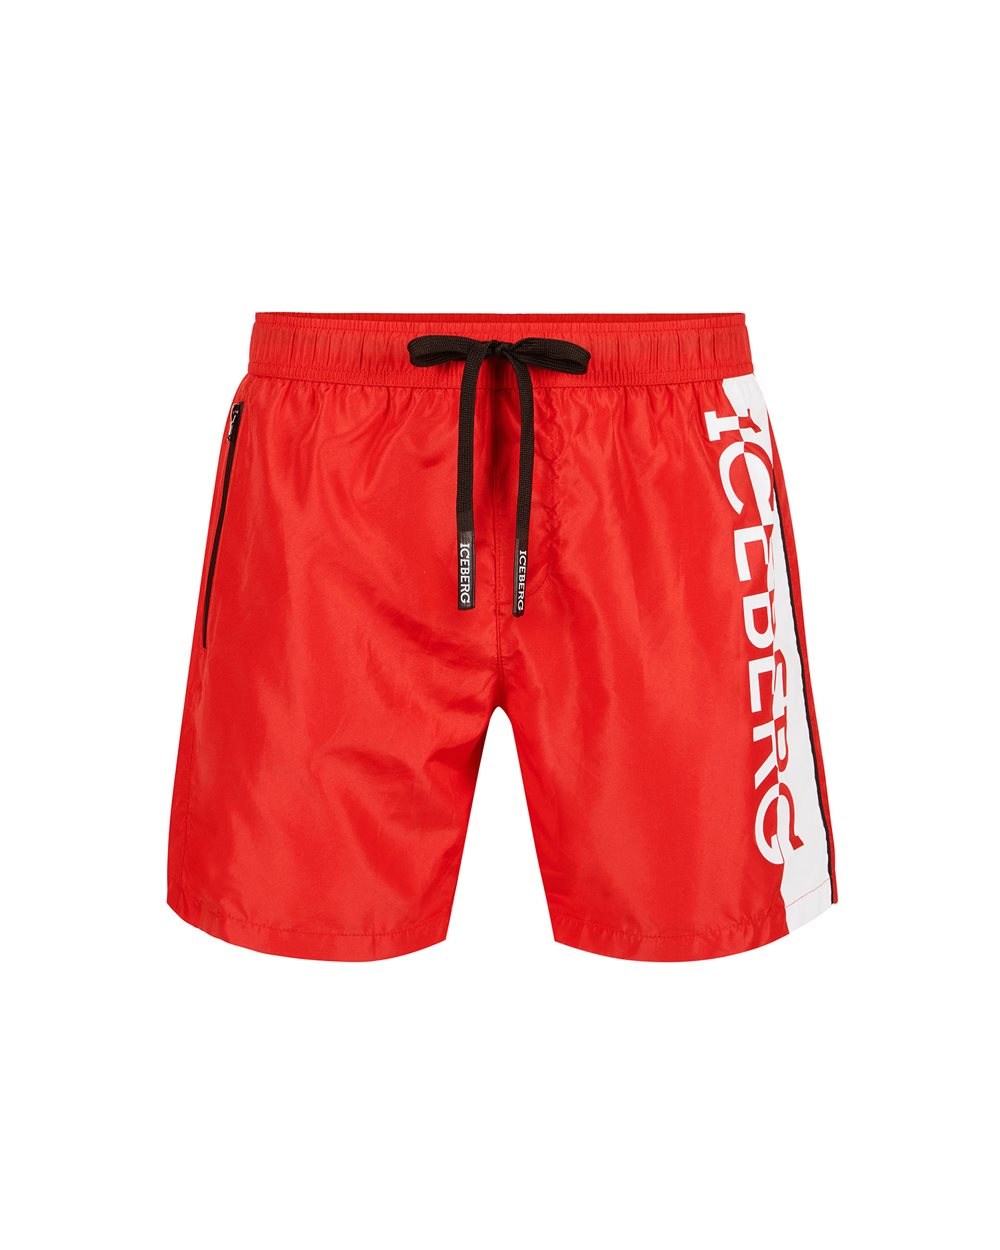 Swim trunks with logo - ( PRIMO STEP US )  PROMO UP TO 30%  | Iceberg - Official Website